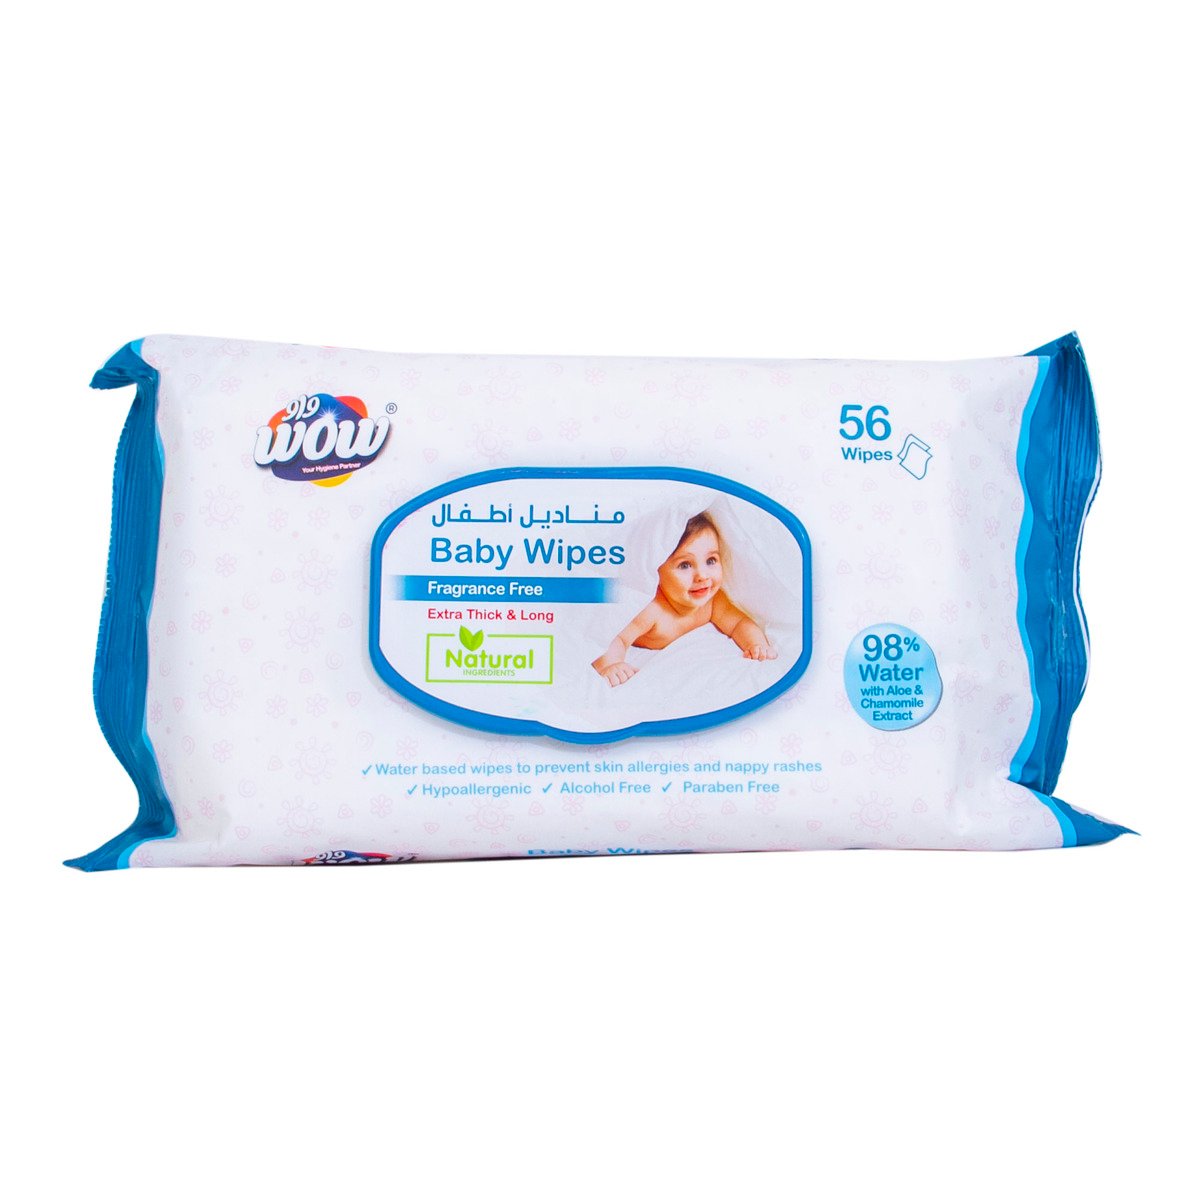 Wow Baby Wipes Fragrance Free, 56 pcs